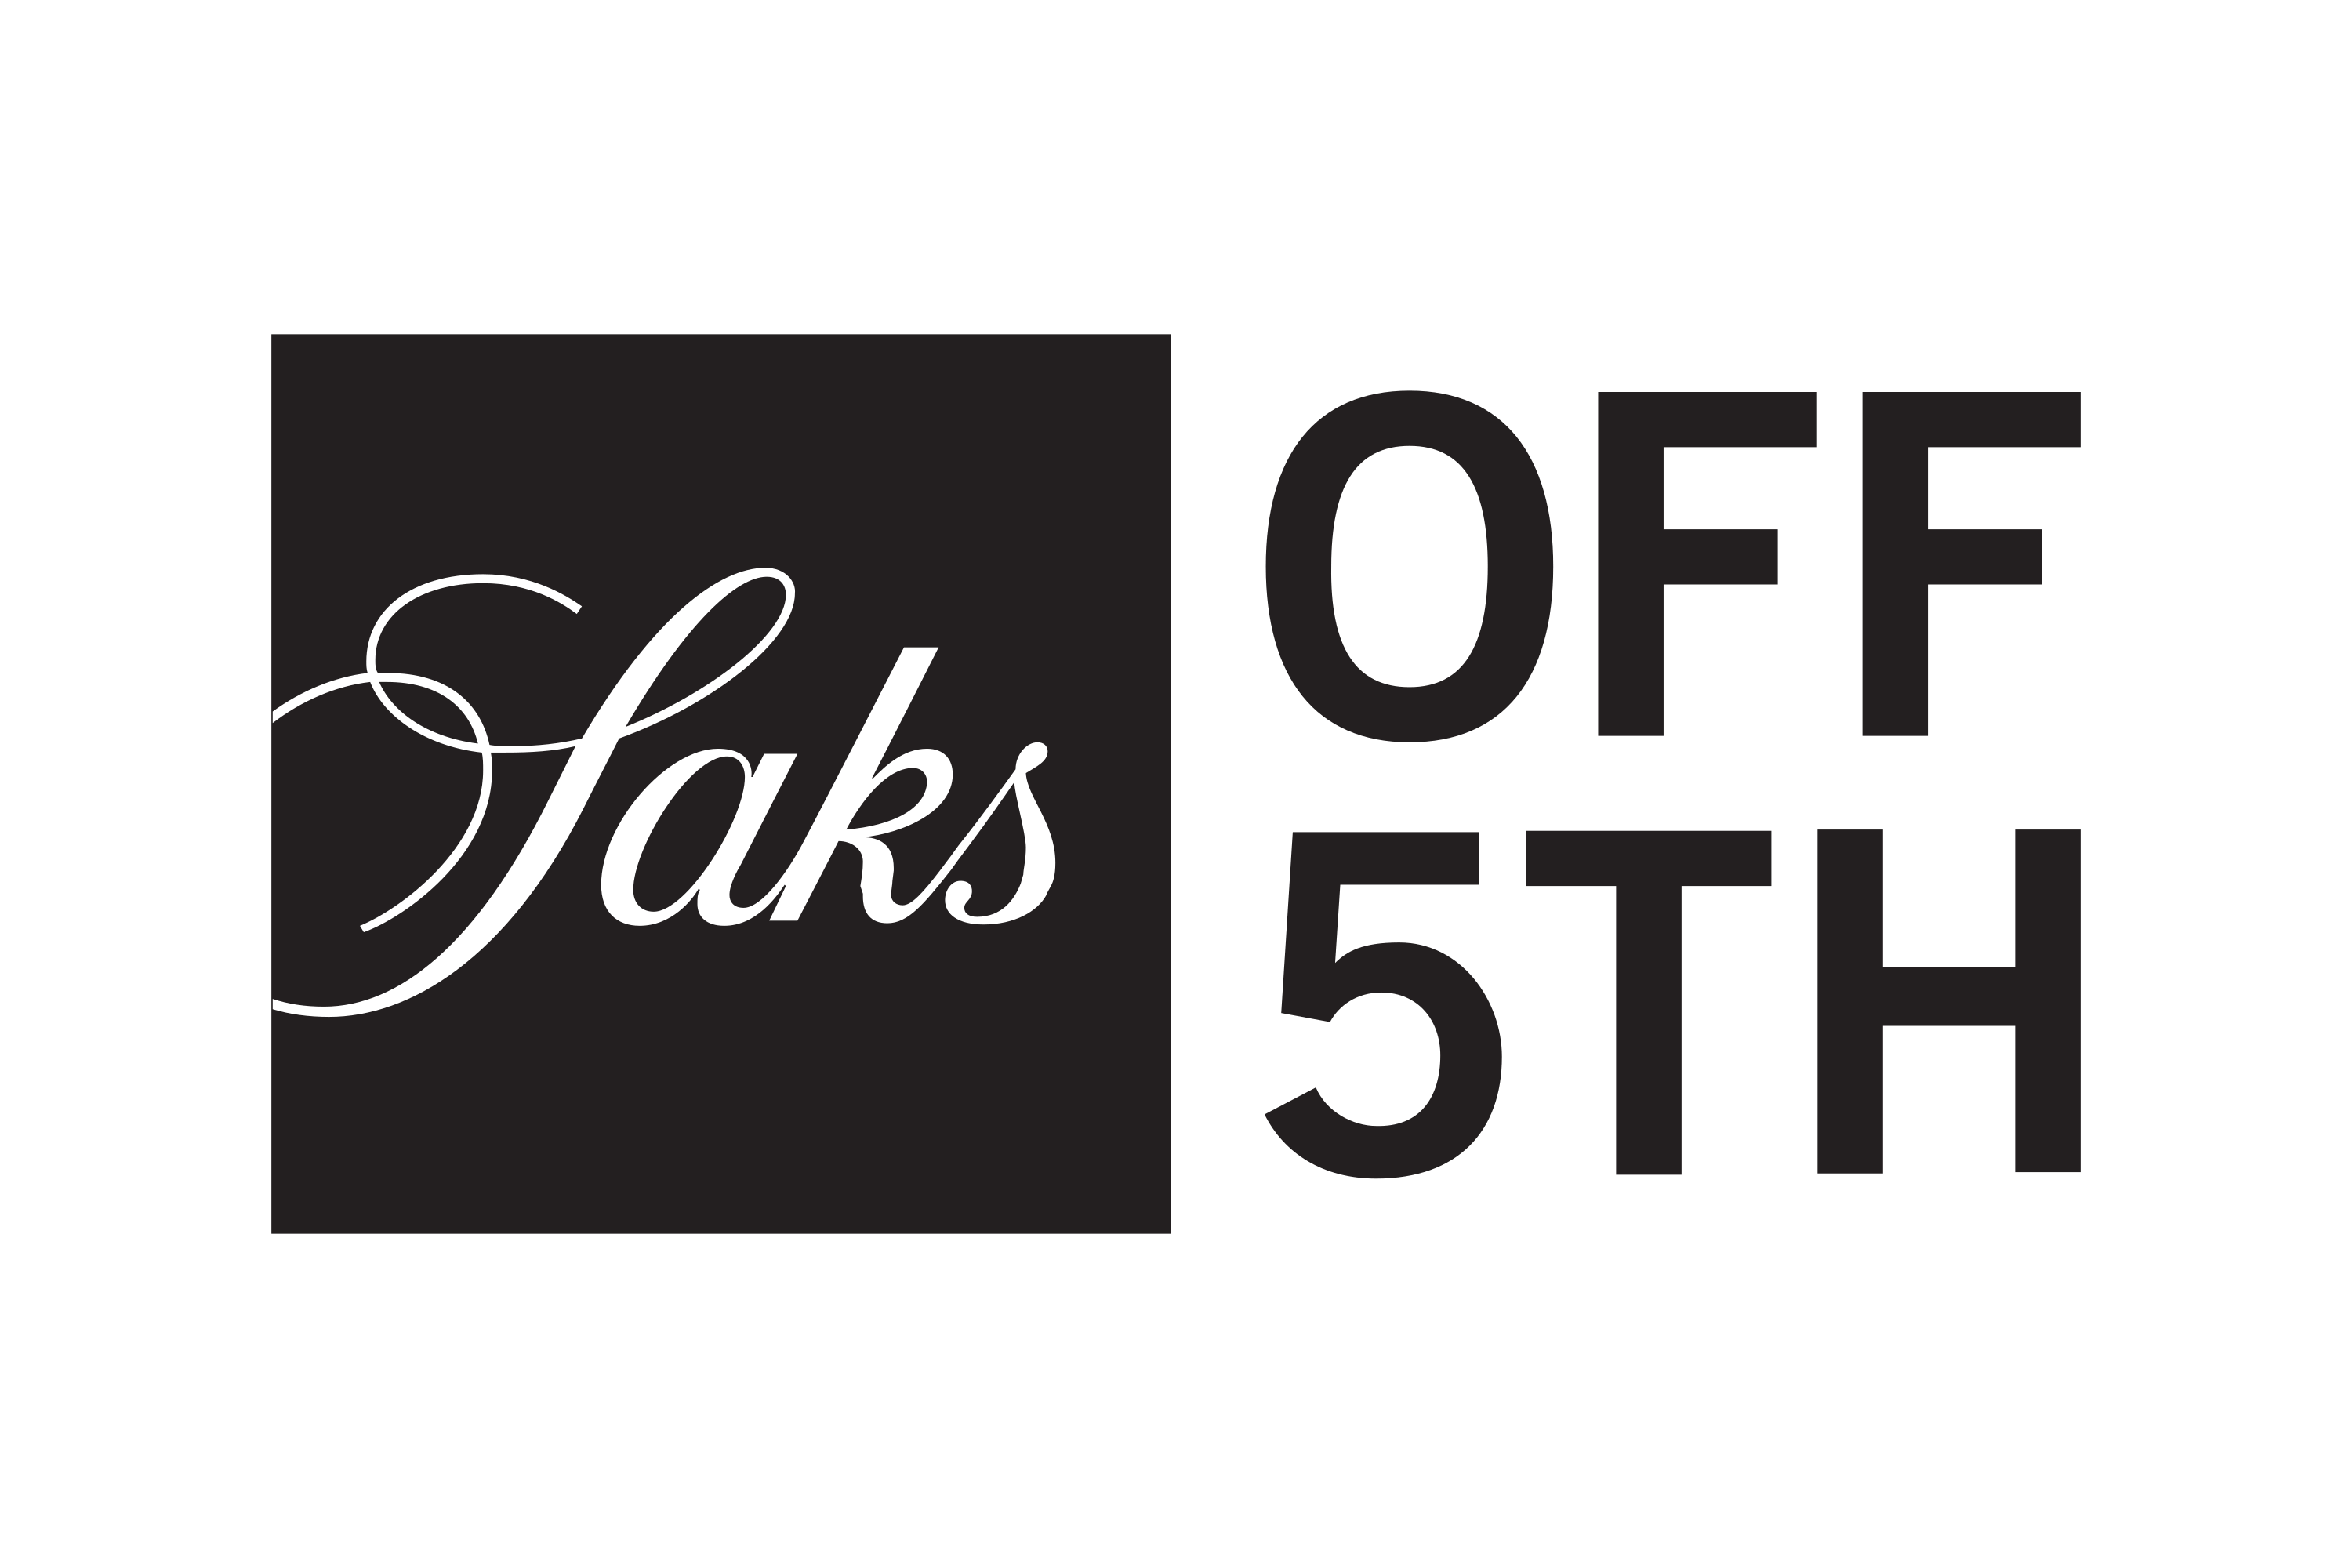 Saks Off 5th Coupon: 25% Off of $150+ Purchases: Men's, Women's, Kids', Beauty, Home + Free Shipping on $99+